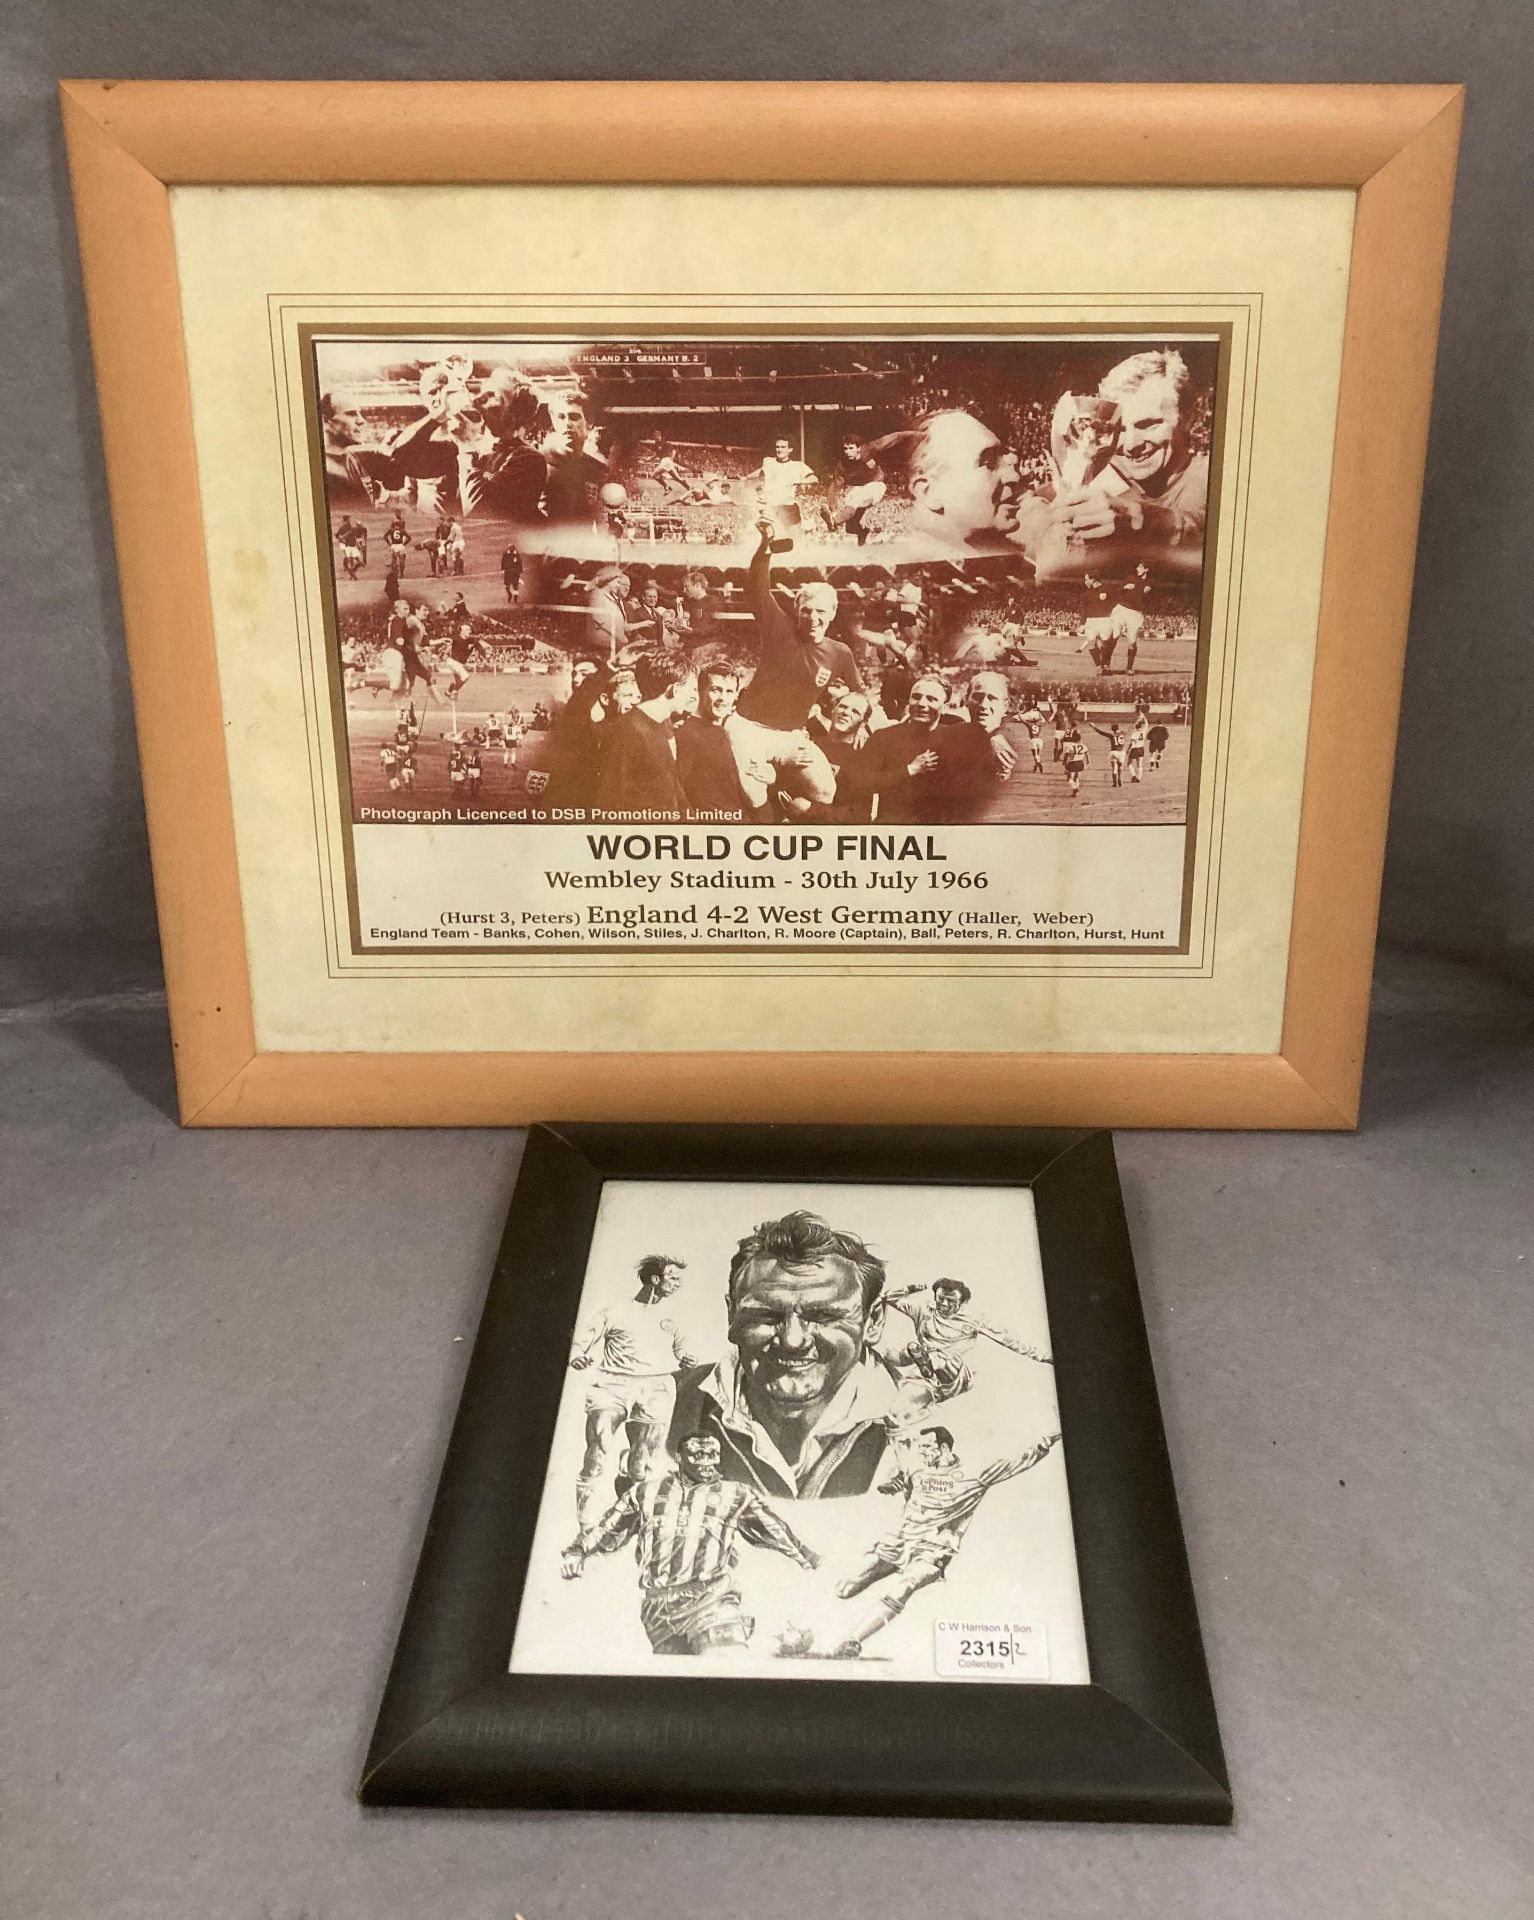 A framed photo print collage World Cup Final Wembley Stadium - 30th July 1966 30 x 40cm and a small